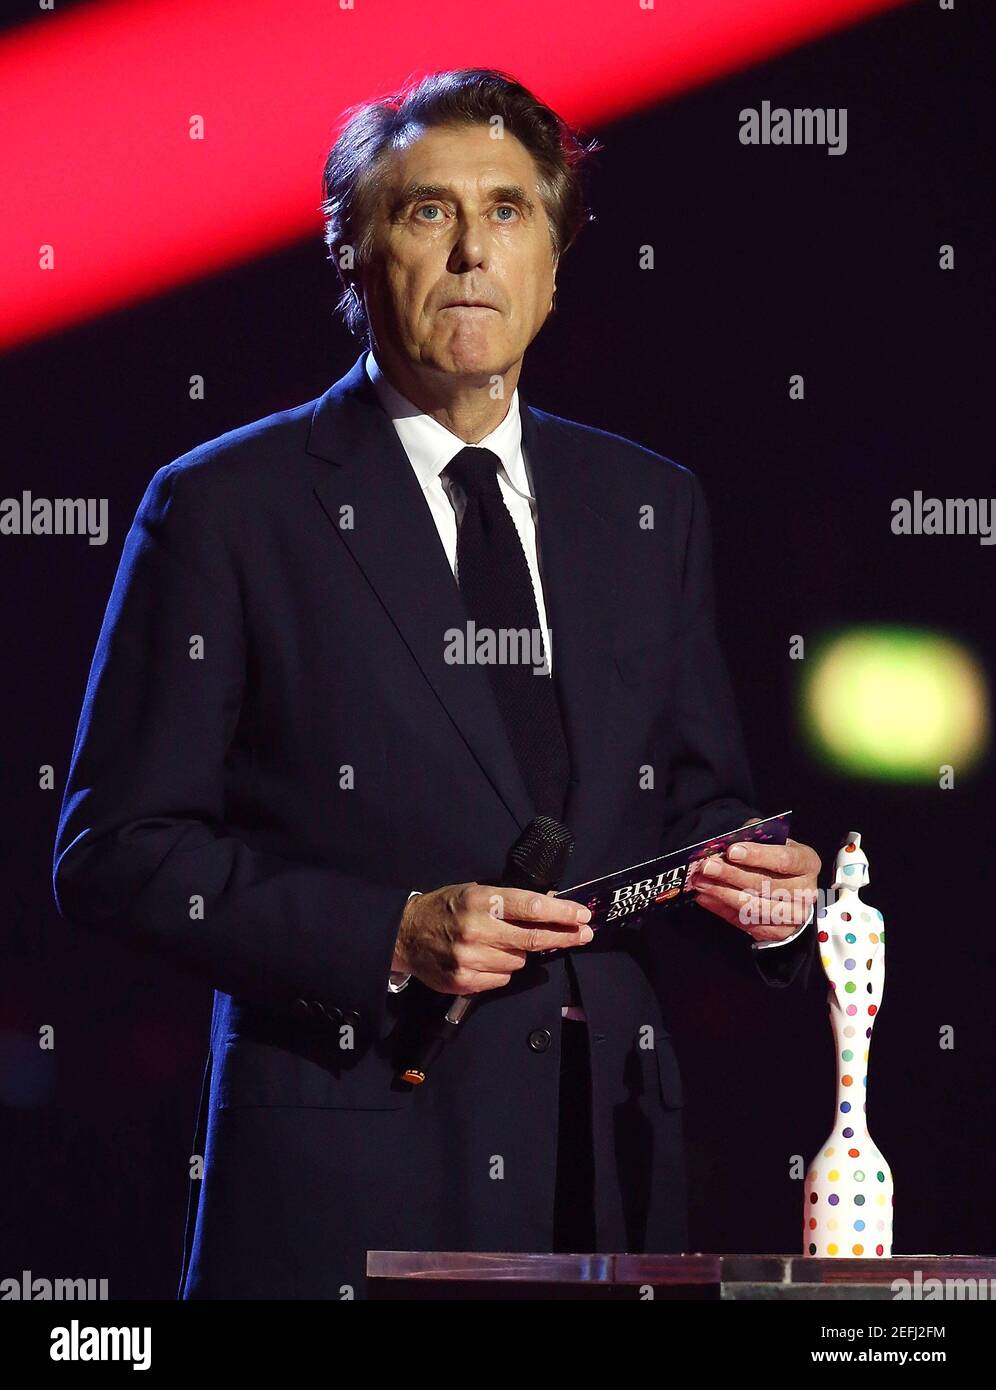 London, UK.  20th February 2013. Brian Ferry of Roxy Music accepts the Brit Award for British Album of the Year during the 2013 Brit Awards Show, 02 Arena, London. Stock Photo